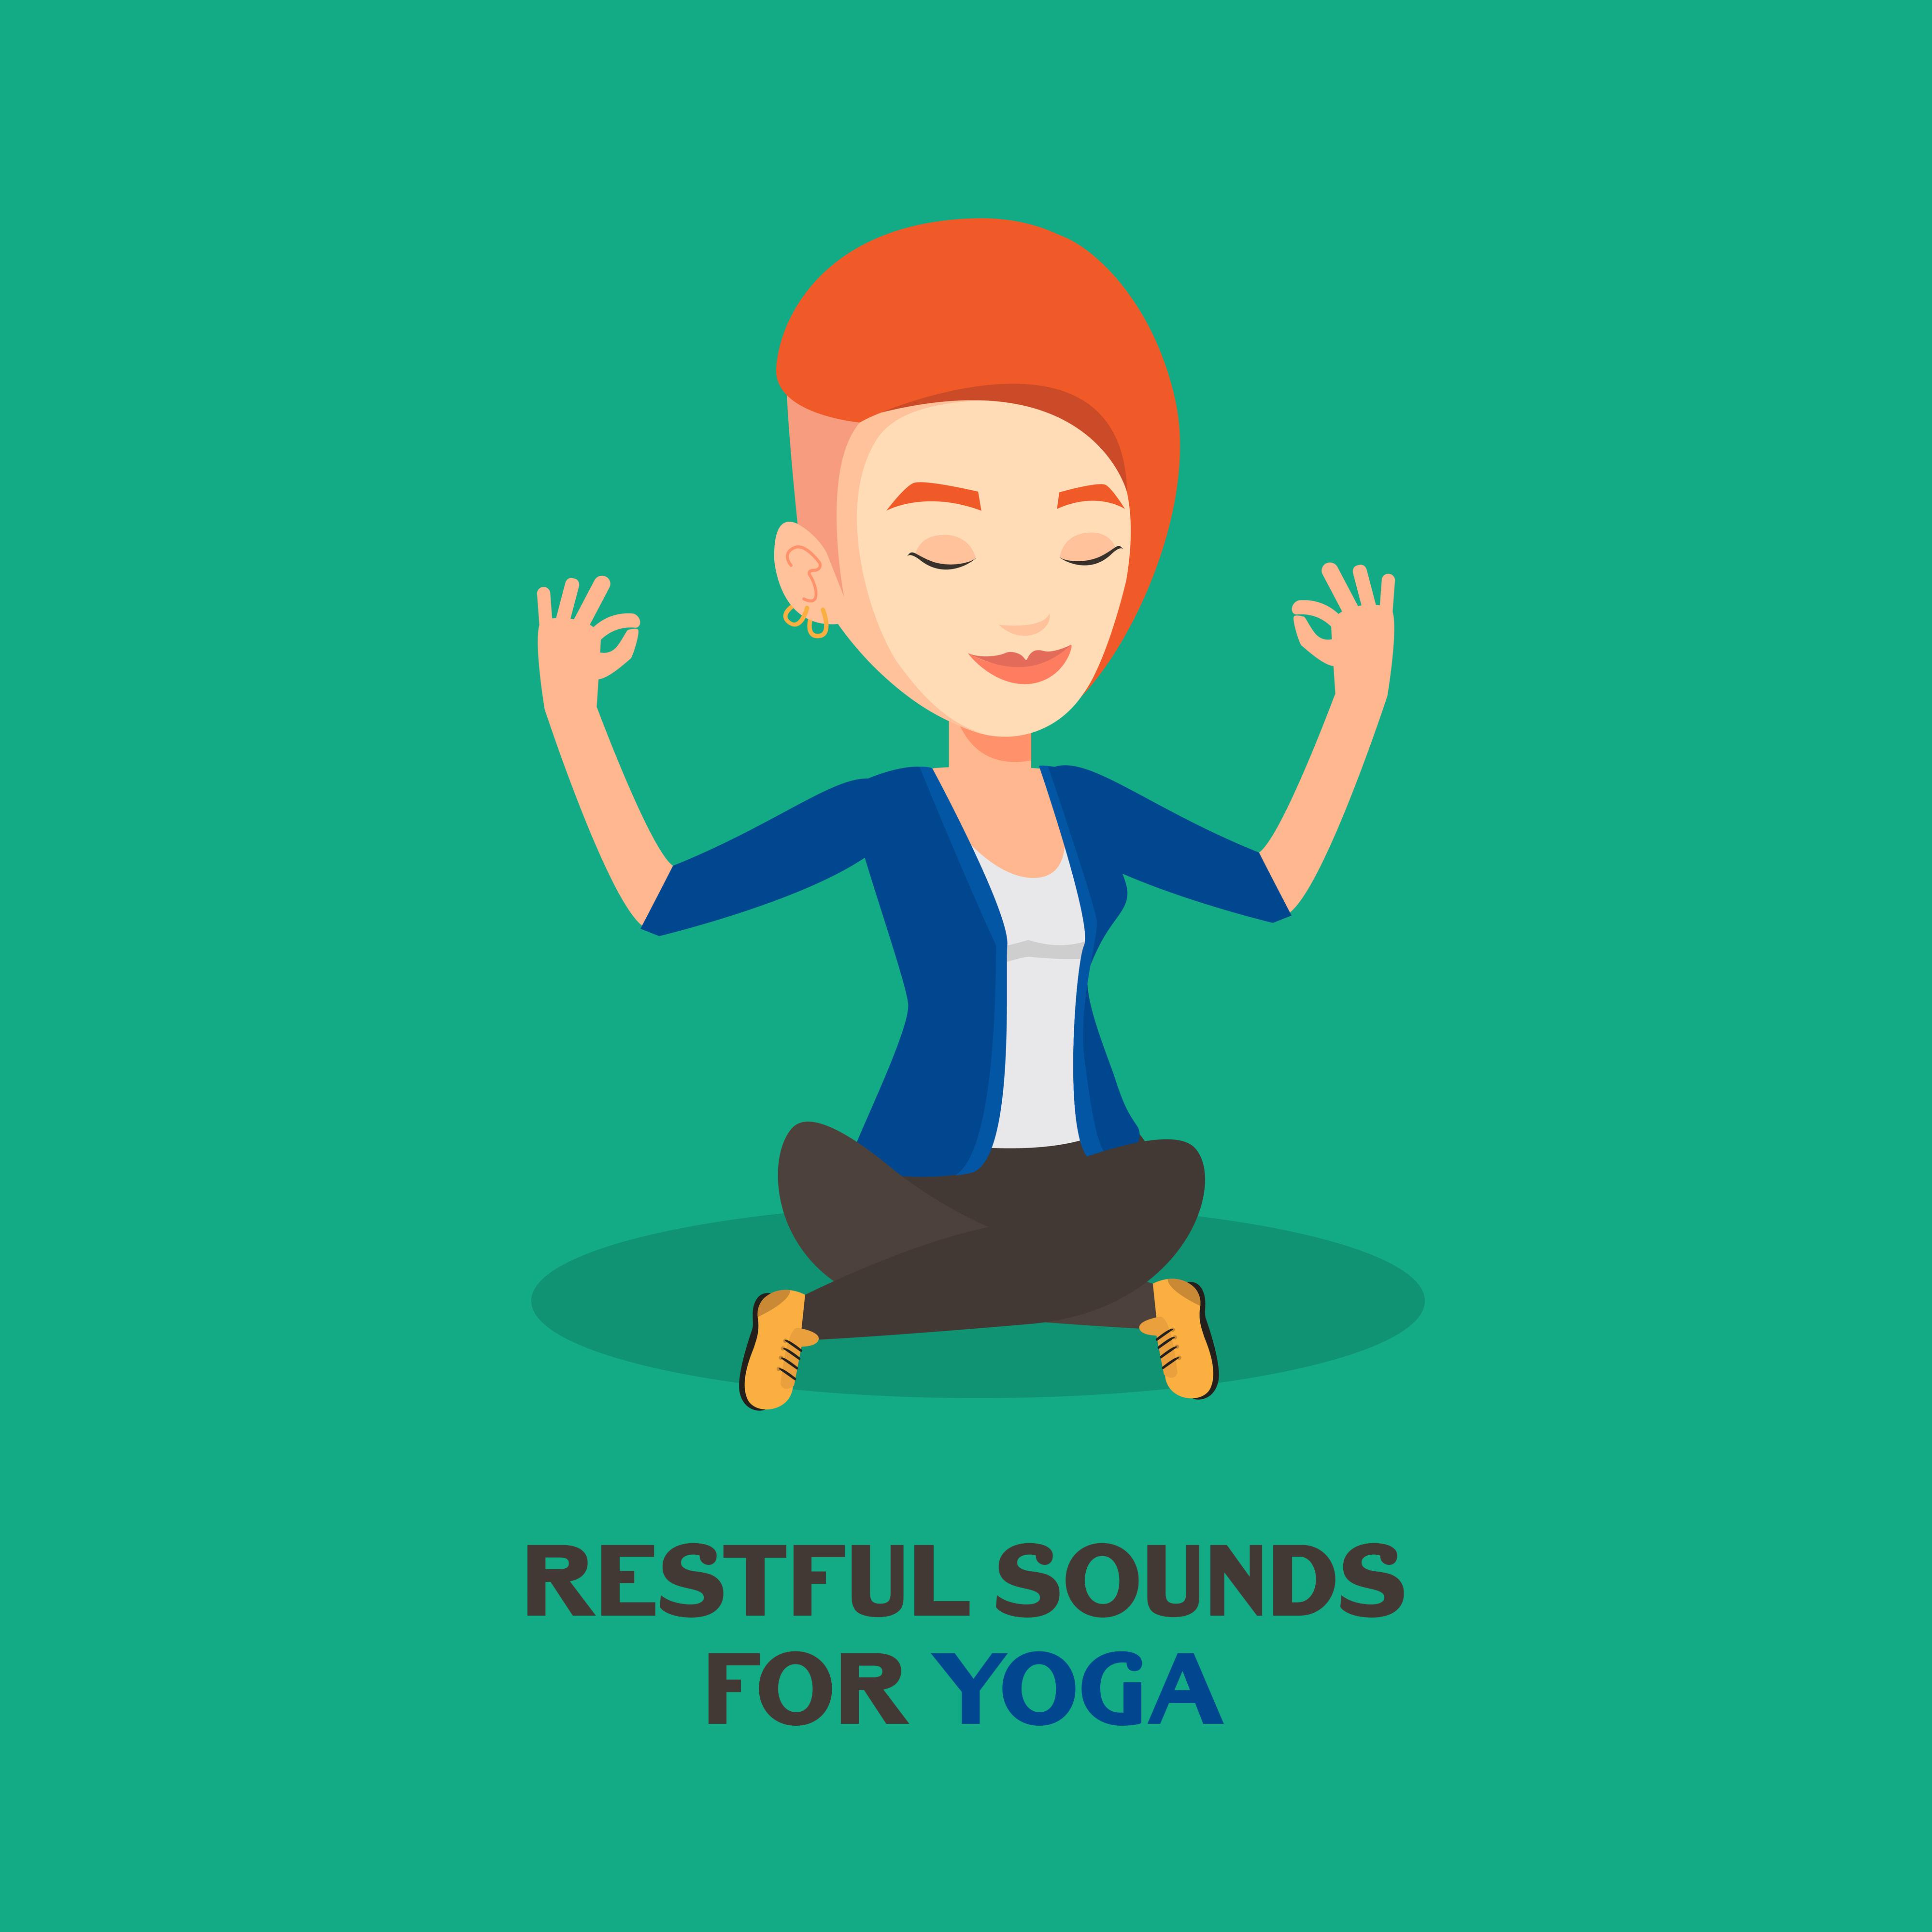 Restful Sounds for Yoga  Meditation Therapy, Healing Yoga to Calm Down, Meditation Hits for Full Concentration, Sleep, Spa, Relax, Zen, Inner Harmony